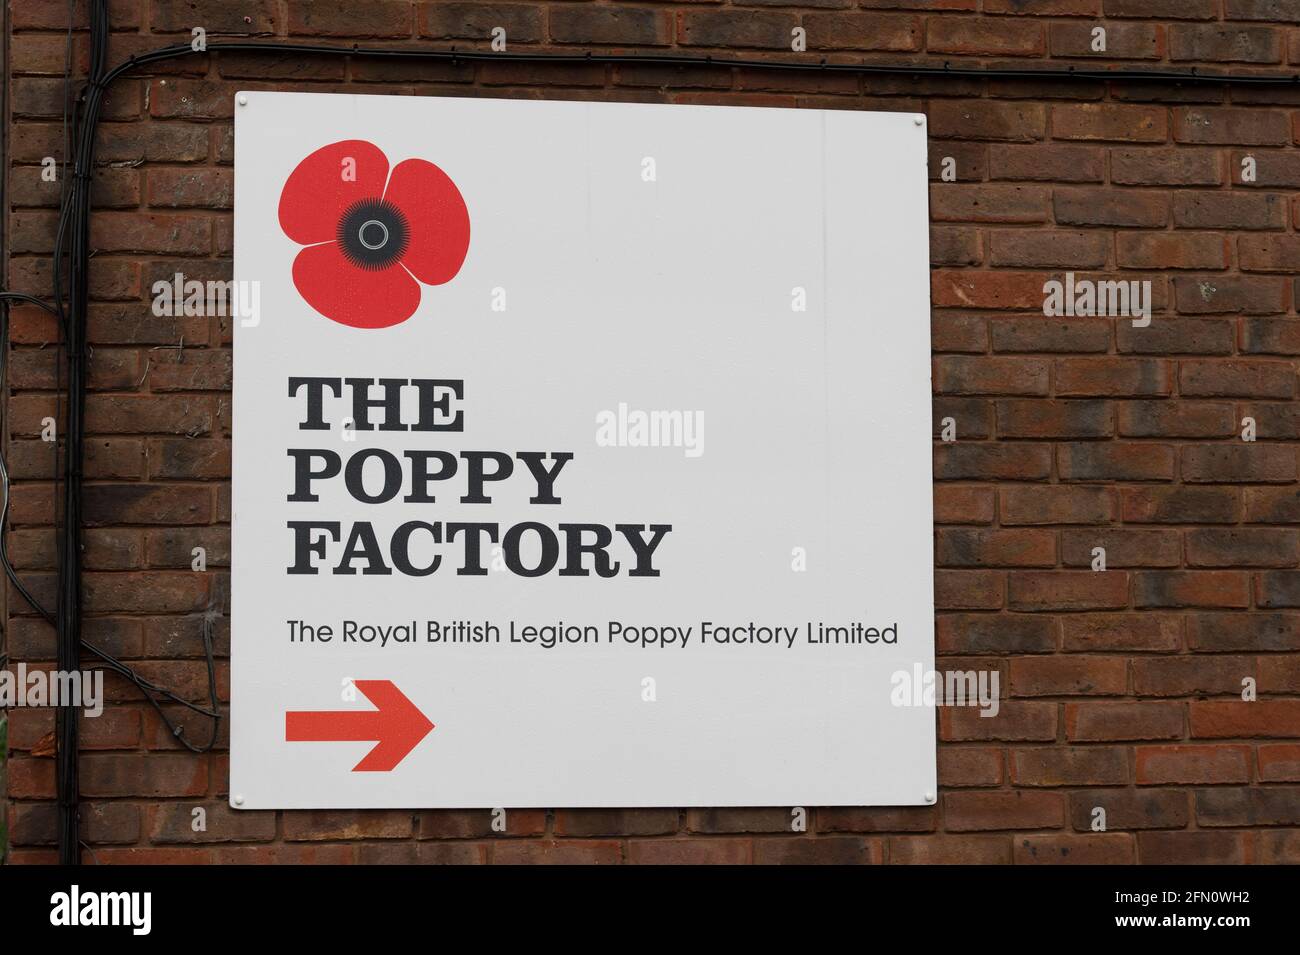 The Royal British Legion's Poppy Factory, 20 Petersham Road, Richmond, London, UK. The Poppy Factory employs ex-service personnel to makes poppies, remembrance crosses, sprays and wreaths for The Royal British Legion’s annual Appeal and Remembrance Day. The Poppy Factory is also responsible for planting and hosting The Field of Remembrance at Westminster Abbey. The Royal British Legion's Poppy Factory, 20 Petersham Road, London, UK.  16 Oct 2013 Stock Photo